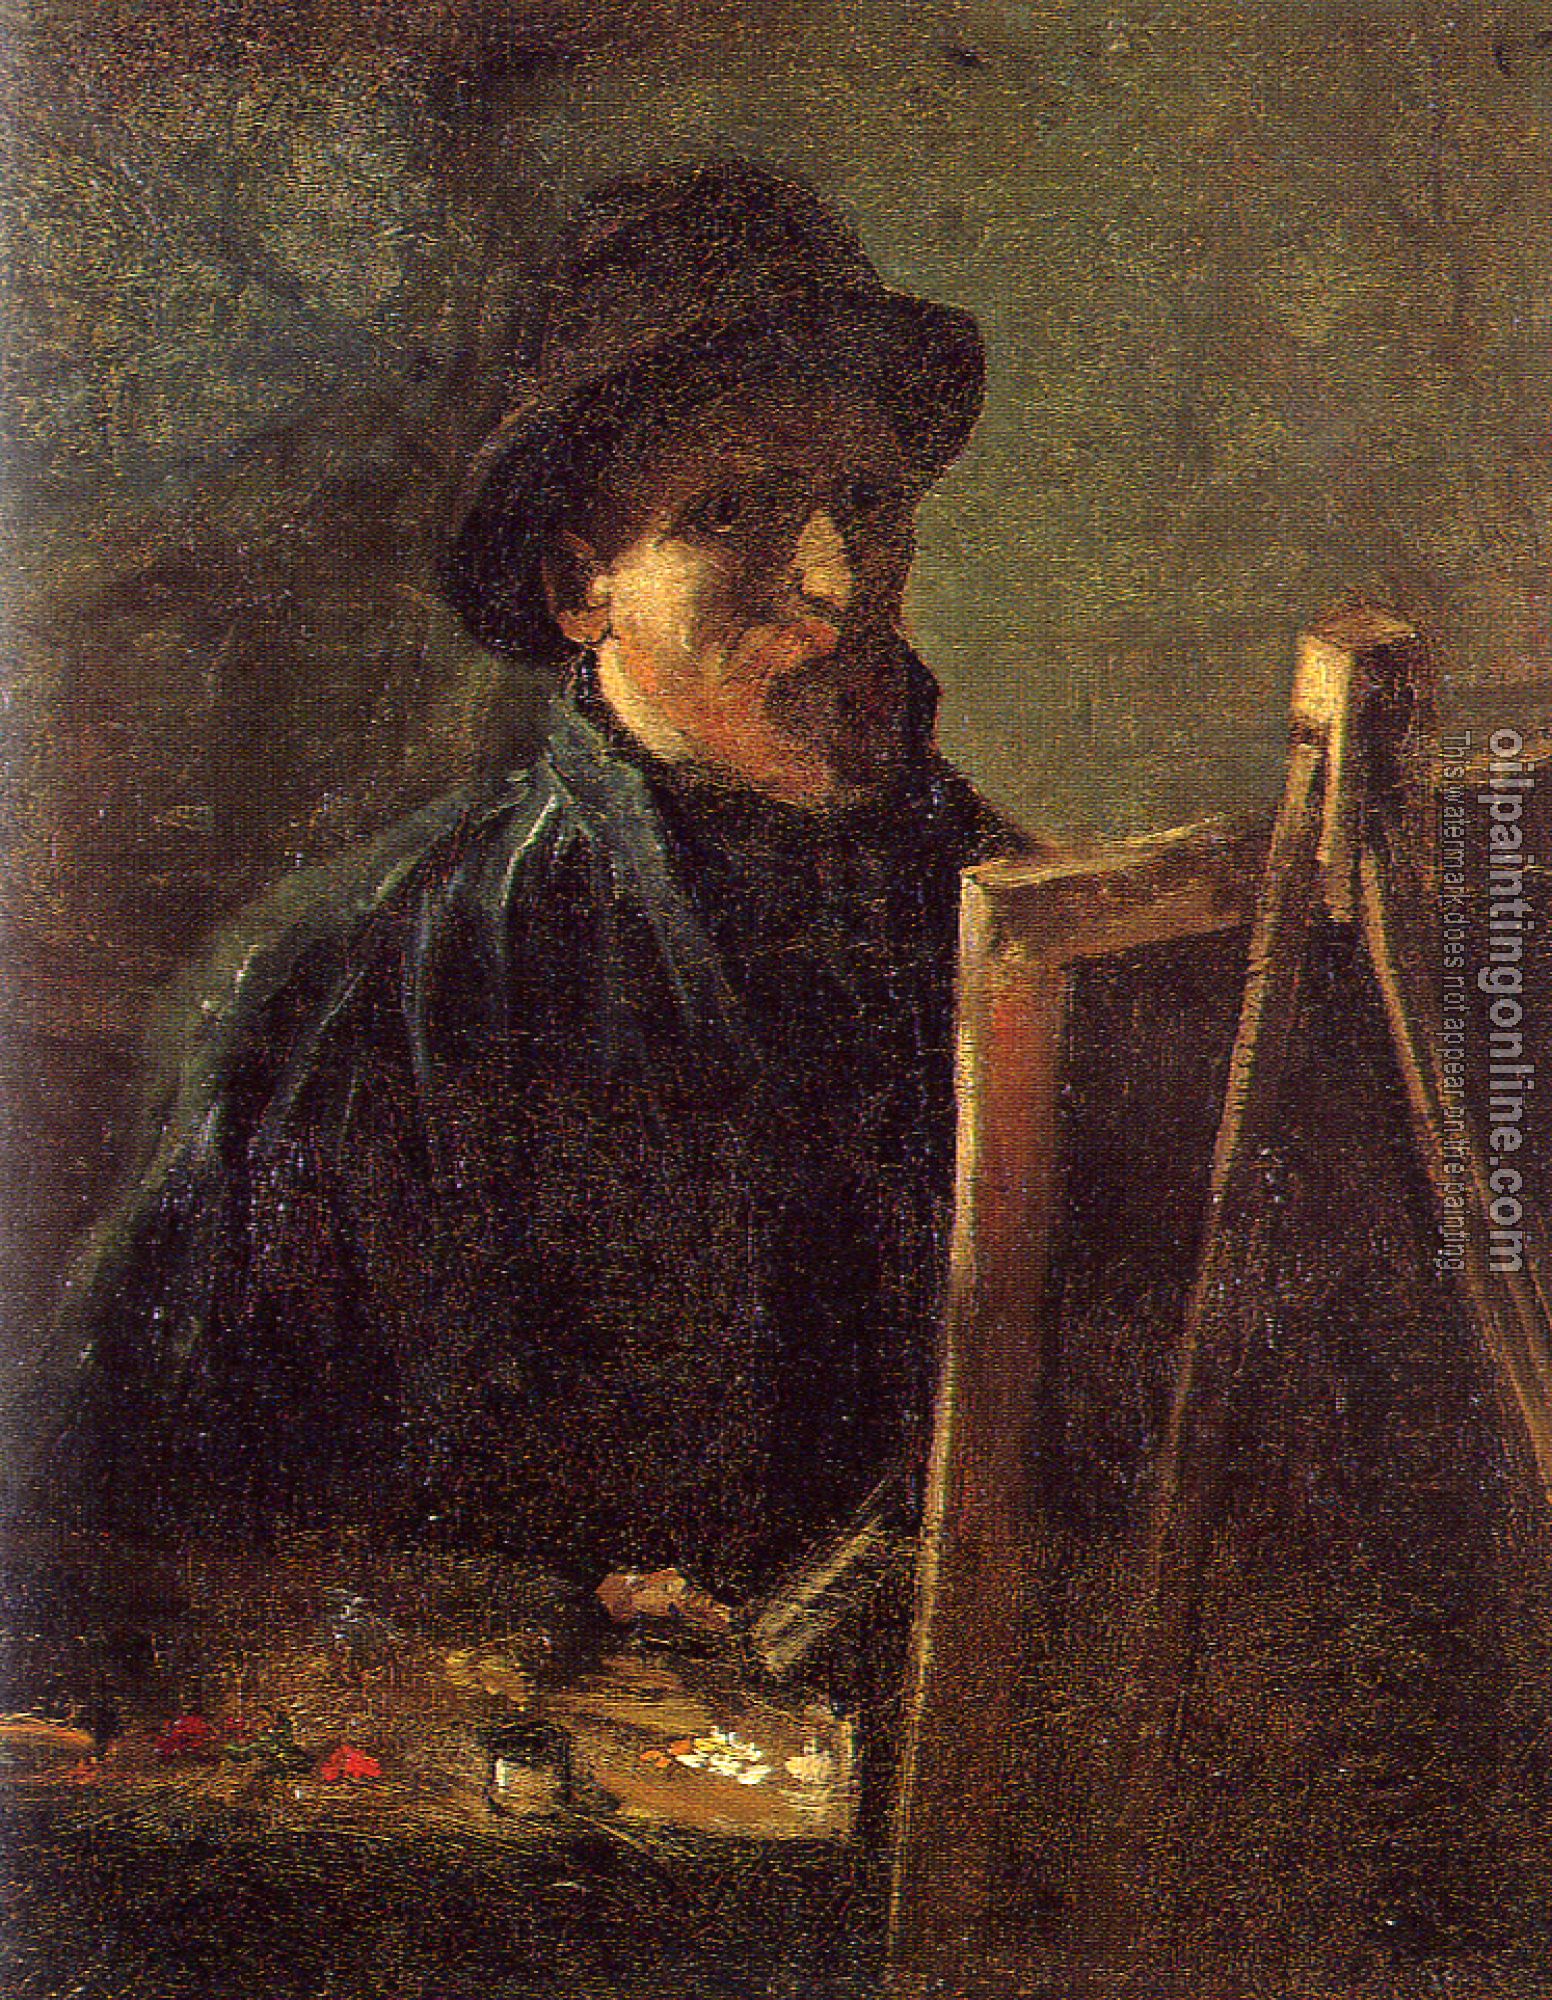 Gogh, Vincent van - Self-Portrait with Dark Felt Hat in front of the Easel